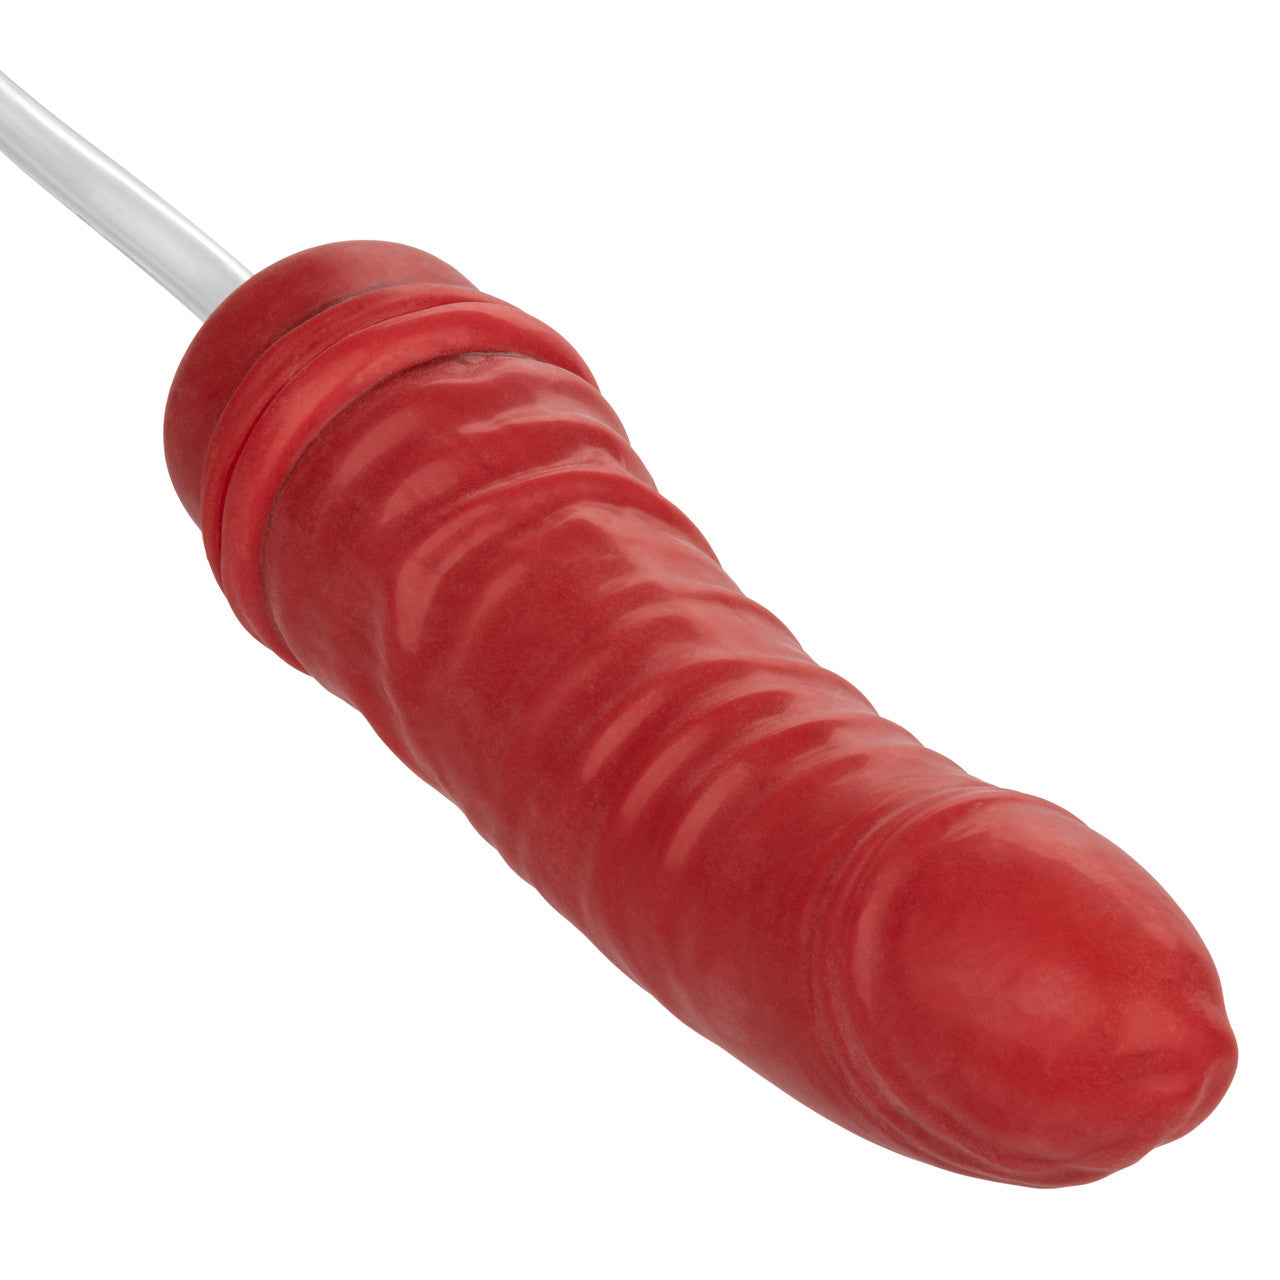 Colt Hefty Probe Inflatable Butt Plug - Red - Thorn & Feather